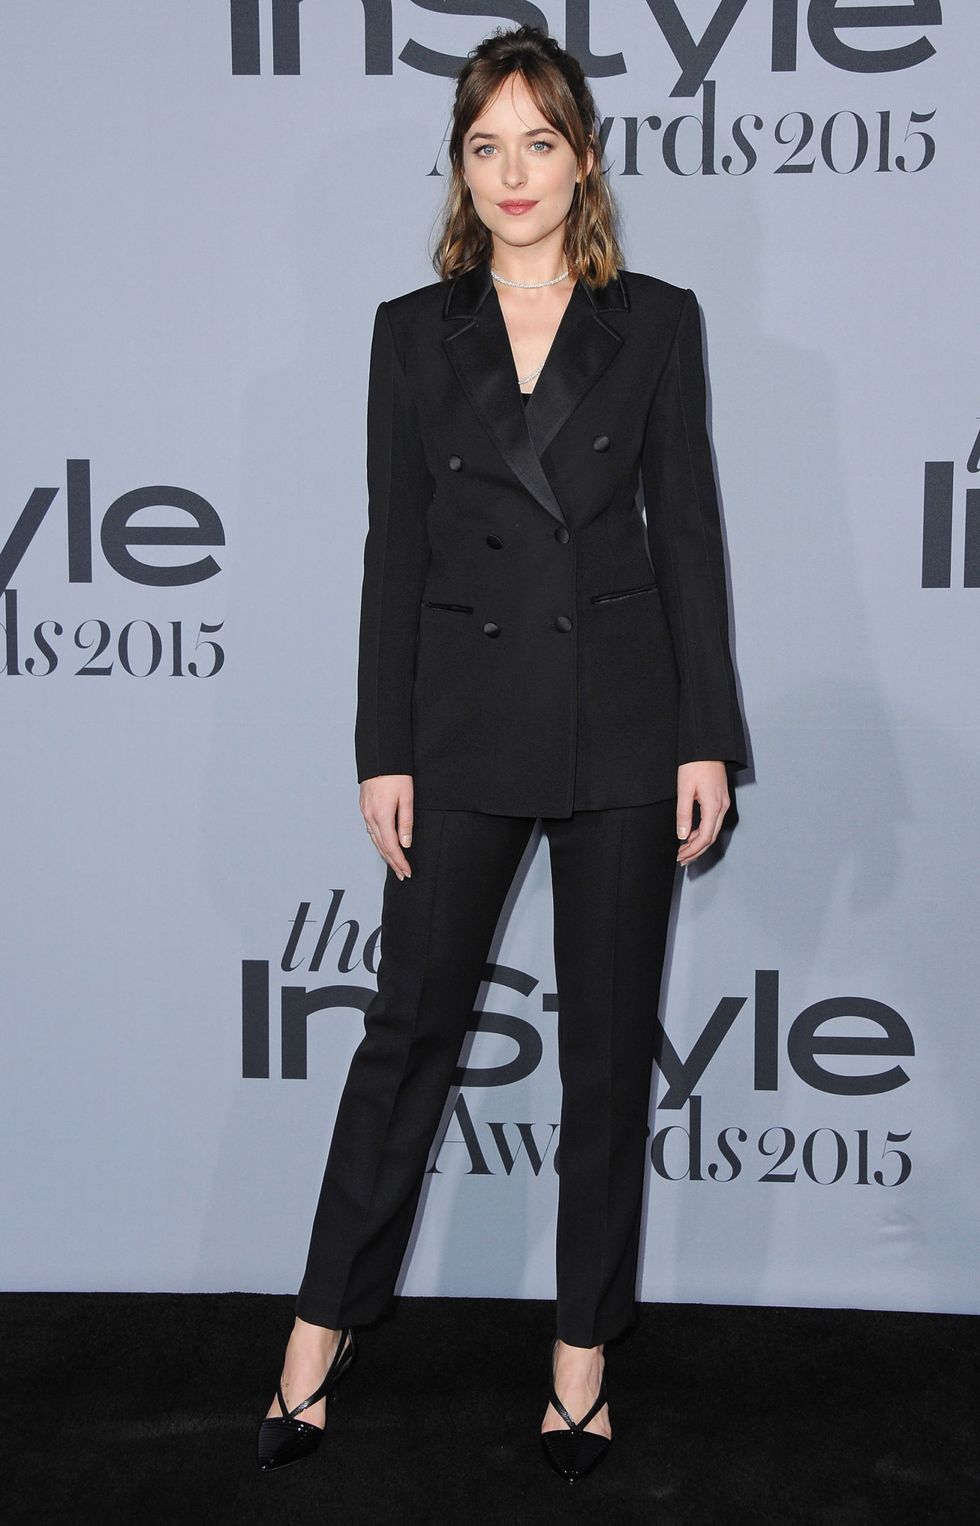 Women in Suits - Female Celebrities in Pant Suits and Tuxedos